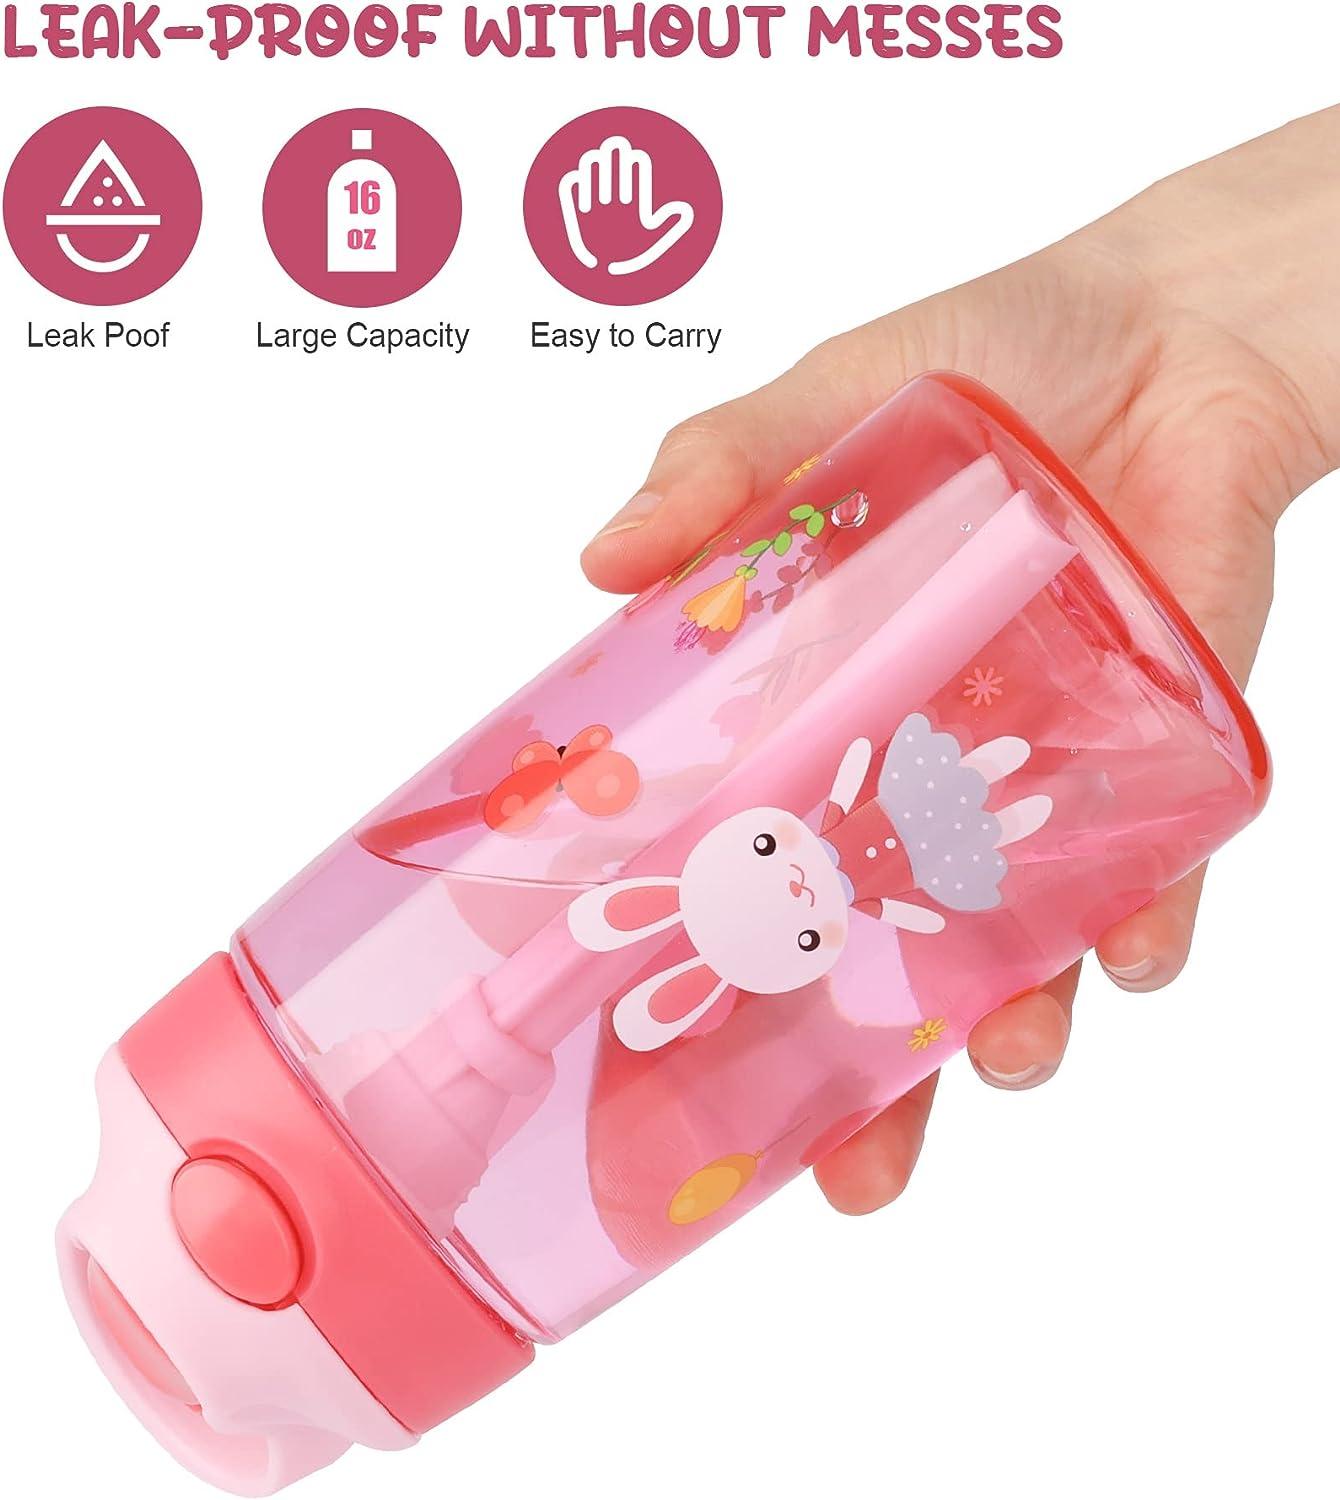 A+ Choice Kids Water Bottle with Straw & Handle - 16 oz BPA Free Kids Water  Bottles Spill Proof Easy-Clean Dishwasher Safe - Cute Rabbit Pink 16 oz Pink